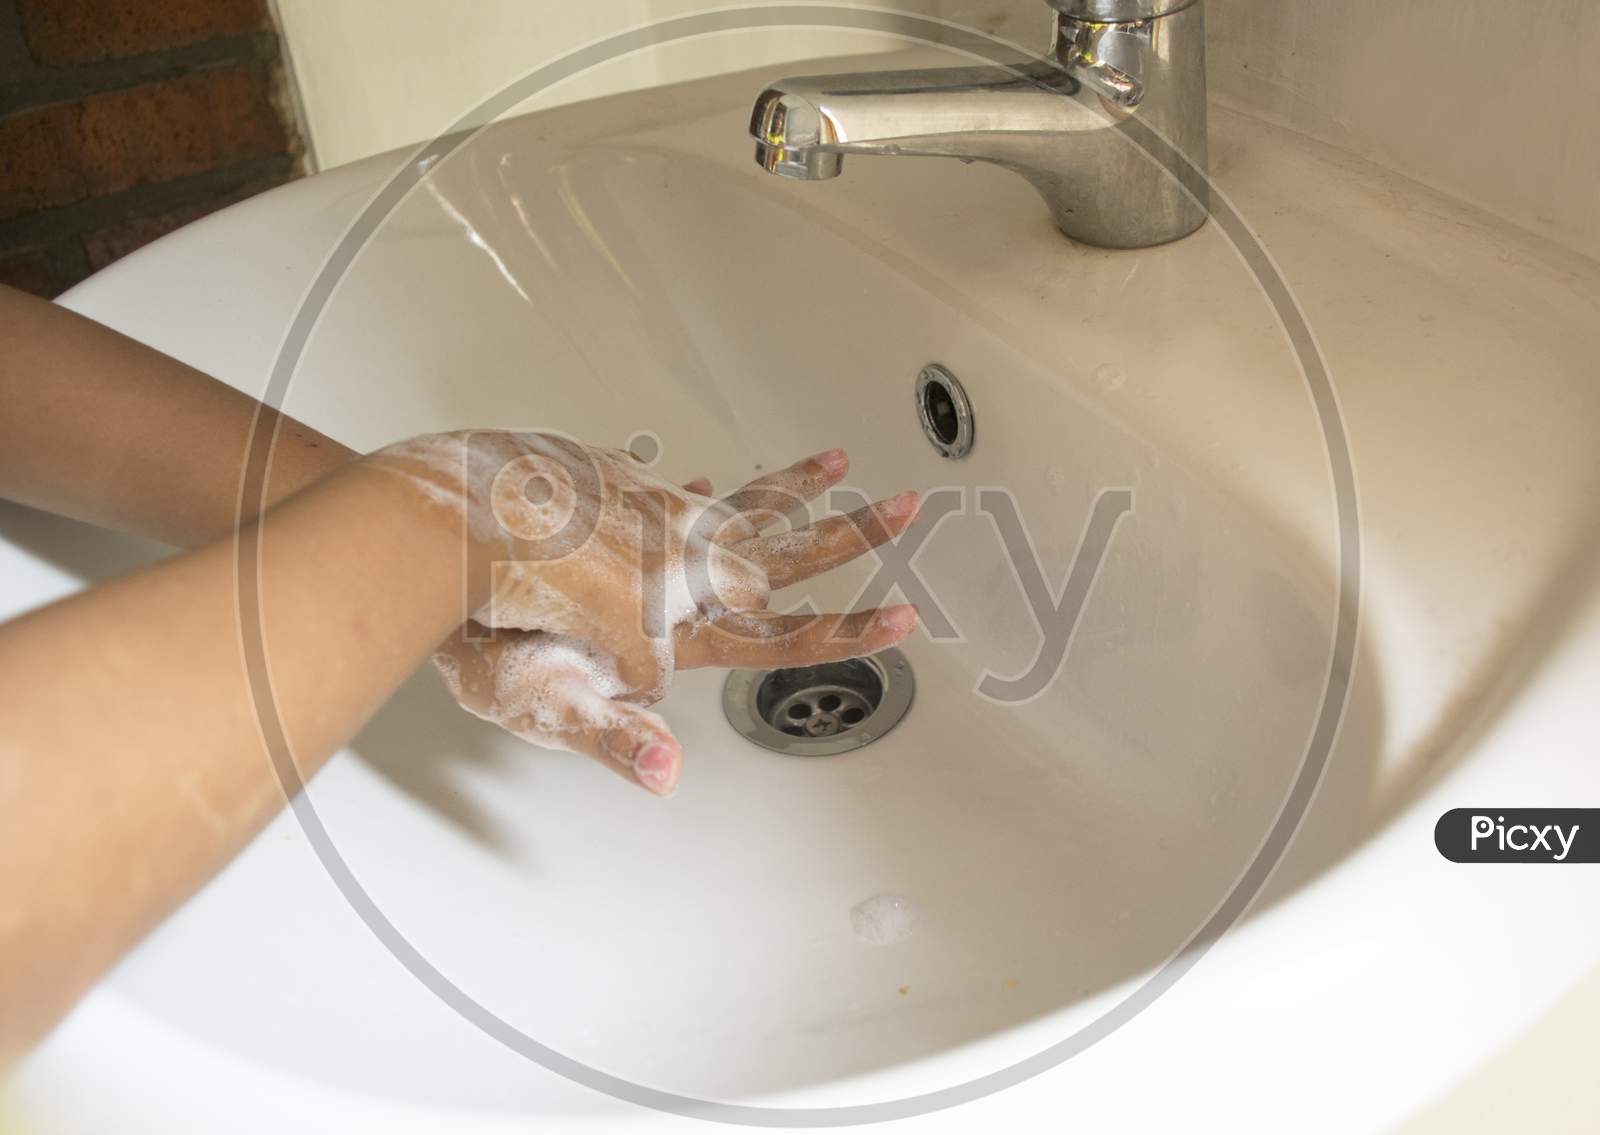 Washing Hands With Foamy Hand Soap Rubbing And Grasping Between The Fingers Of The Back Of The Hand Over The Sink